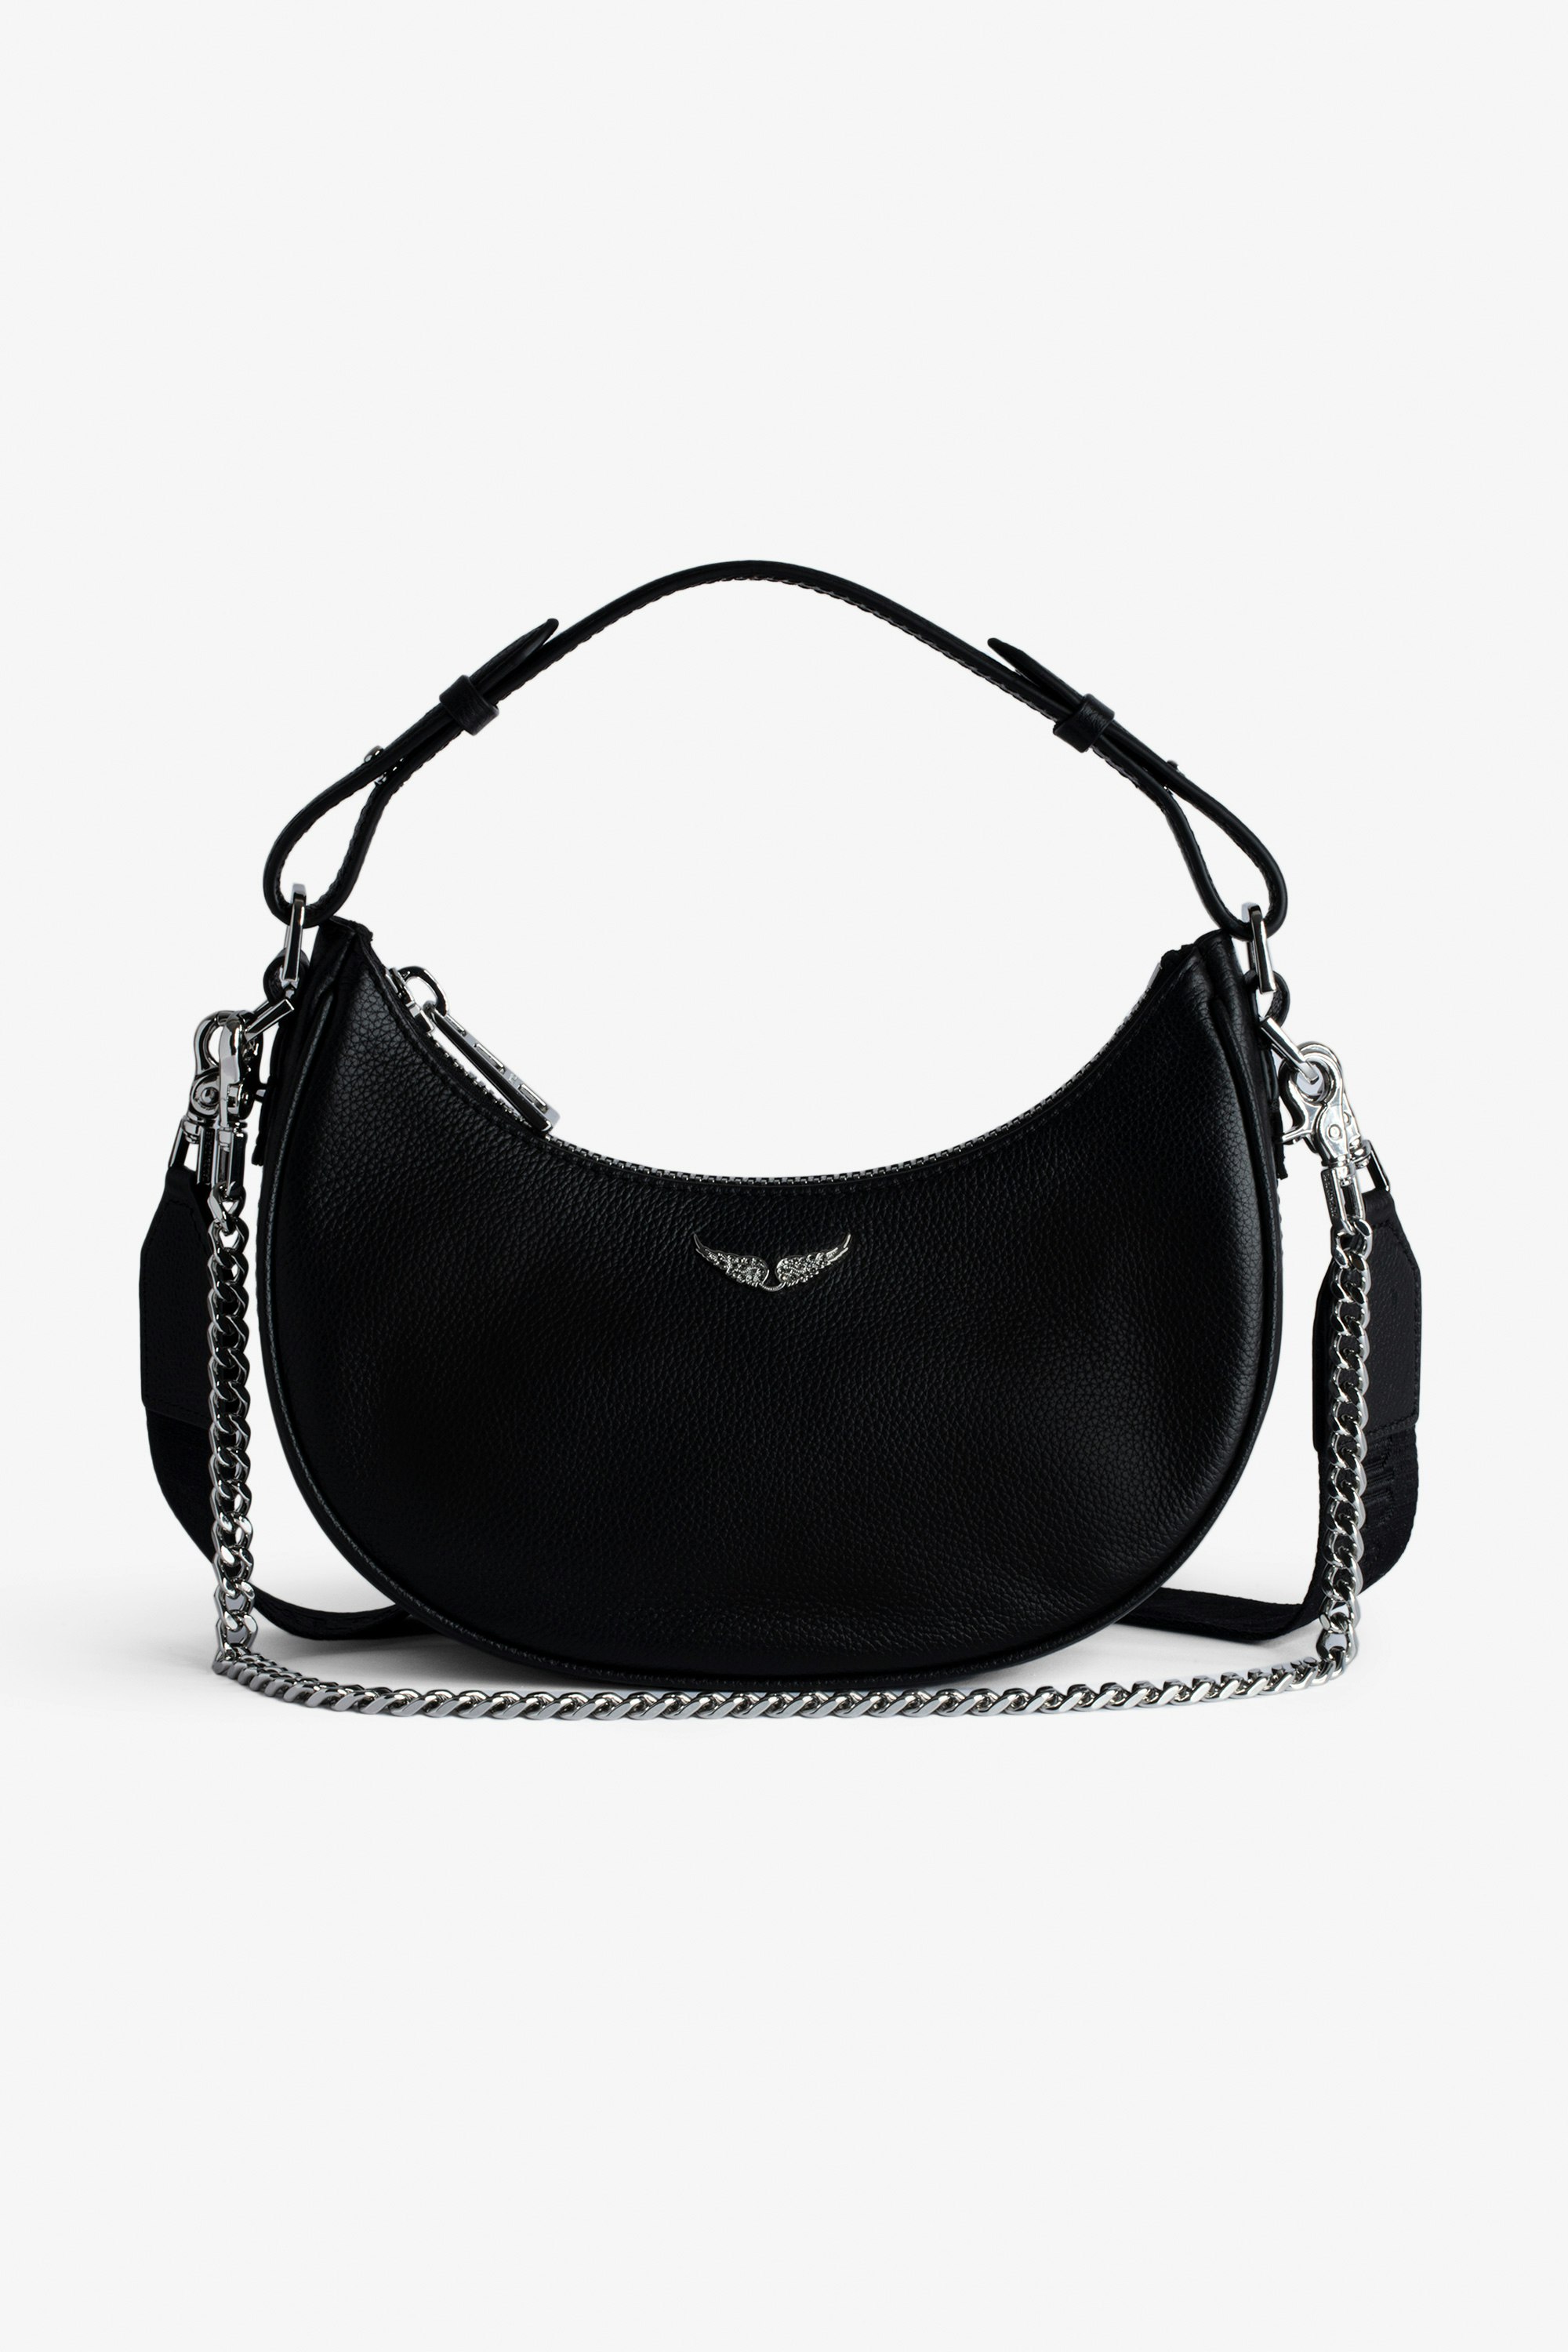 Moonrock Bag - Women’s half-moon bag in black grained leather with a short handle, shoulder strap, chain and signature wings.